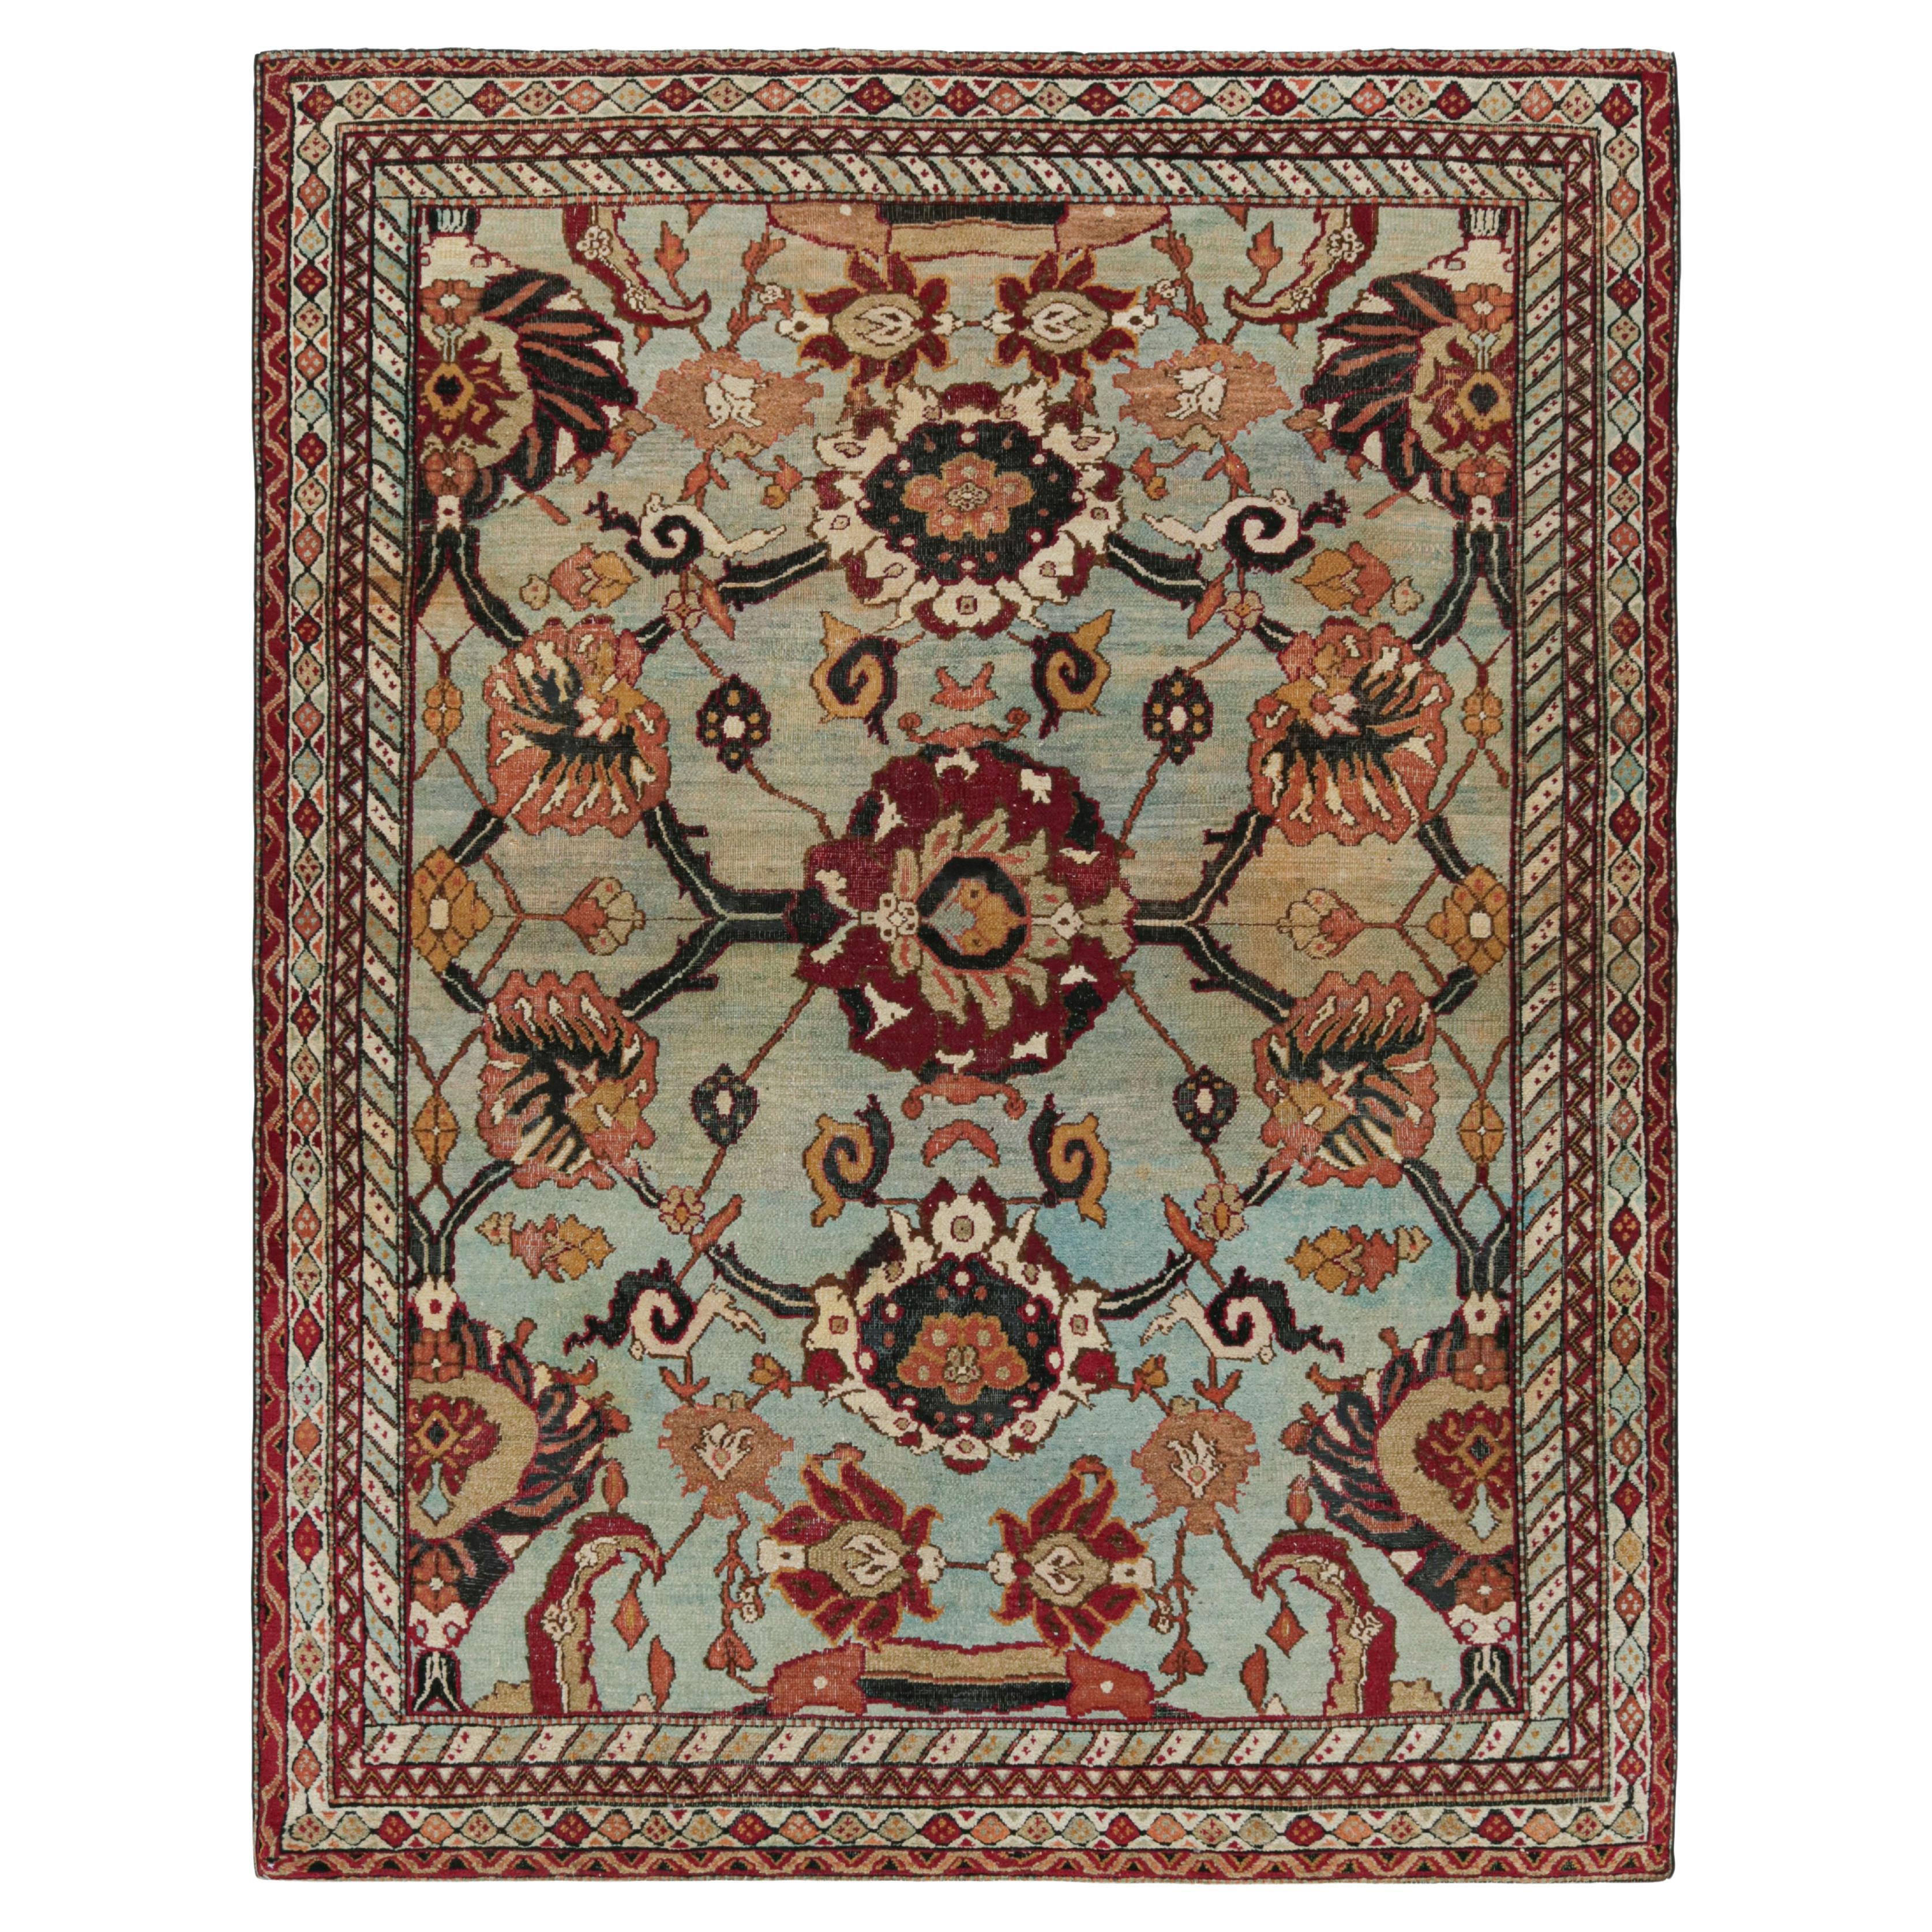 Antique Agra Rug in Blue with Floral Patterns, from Rug & Kilim